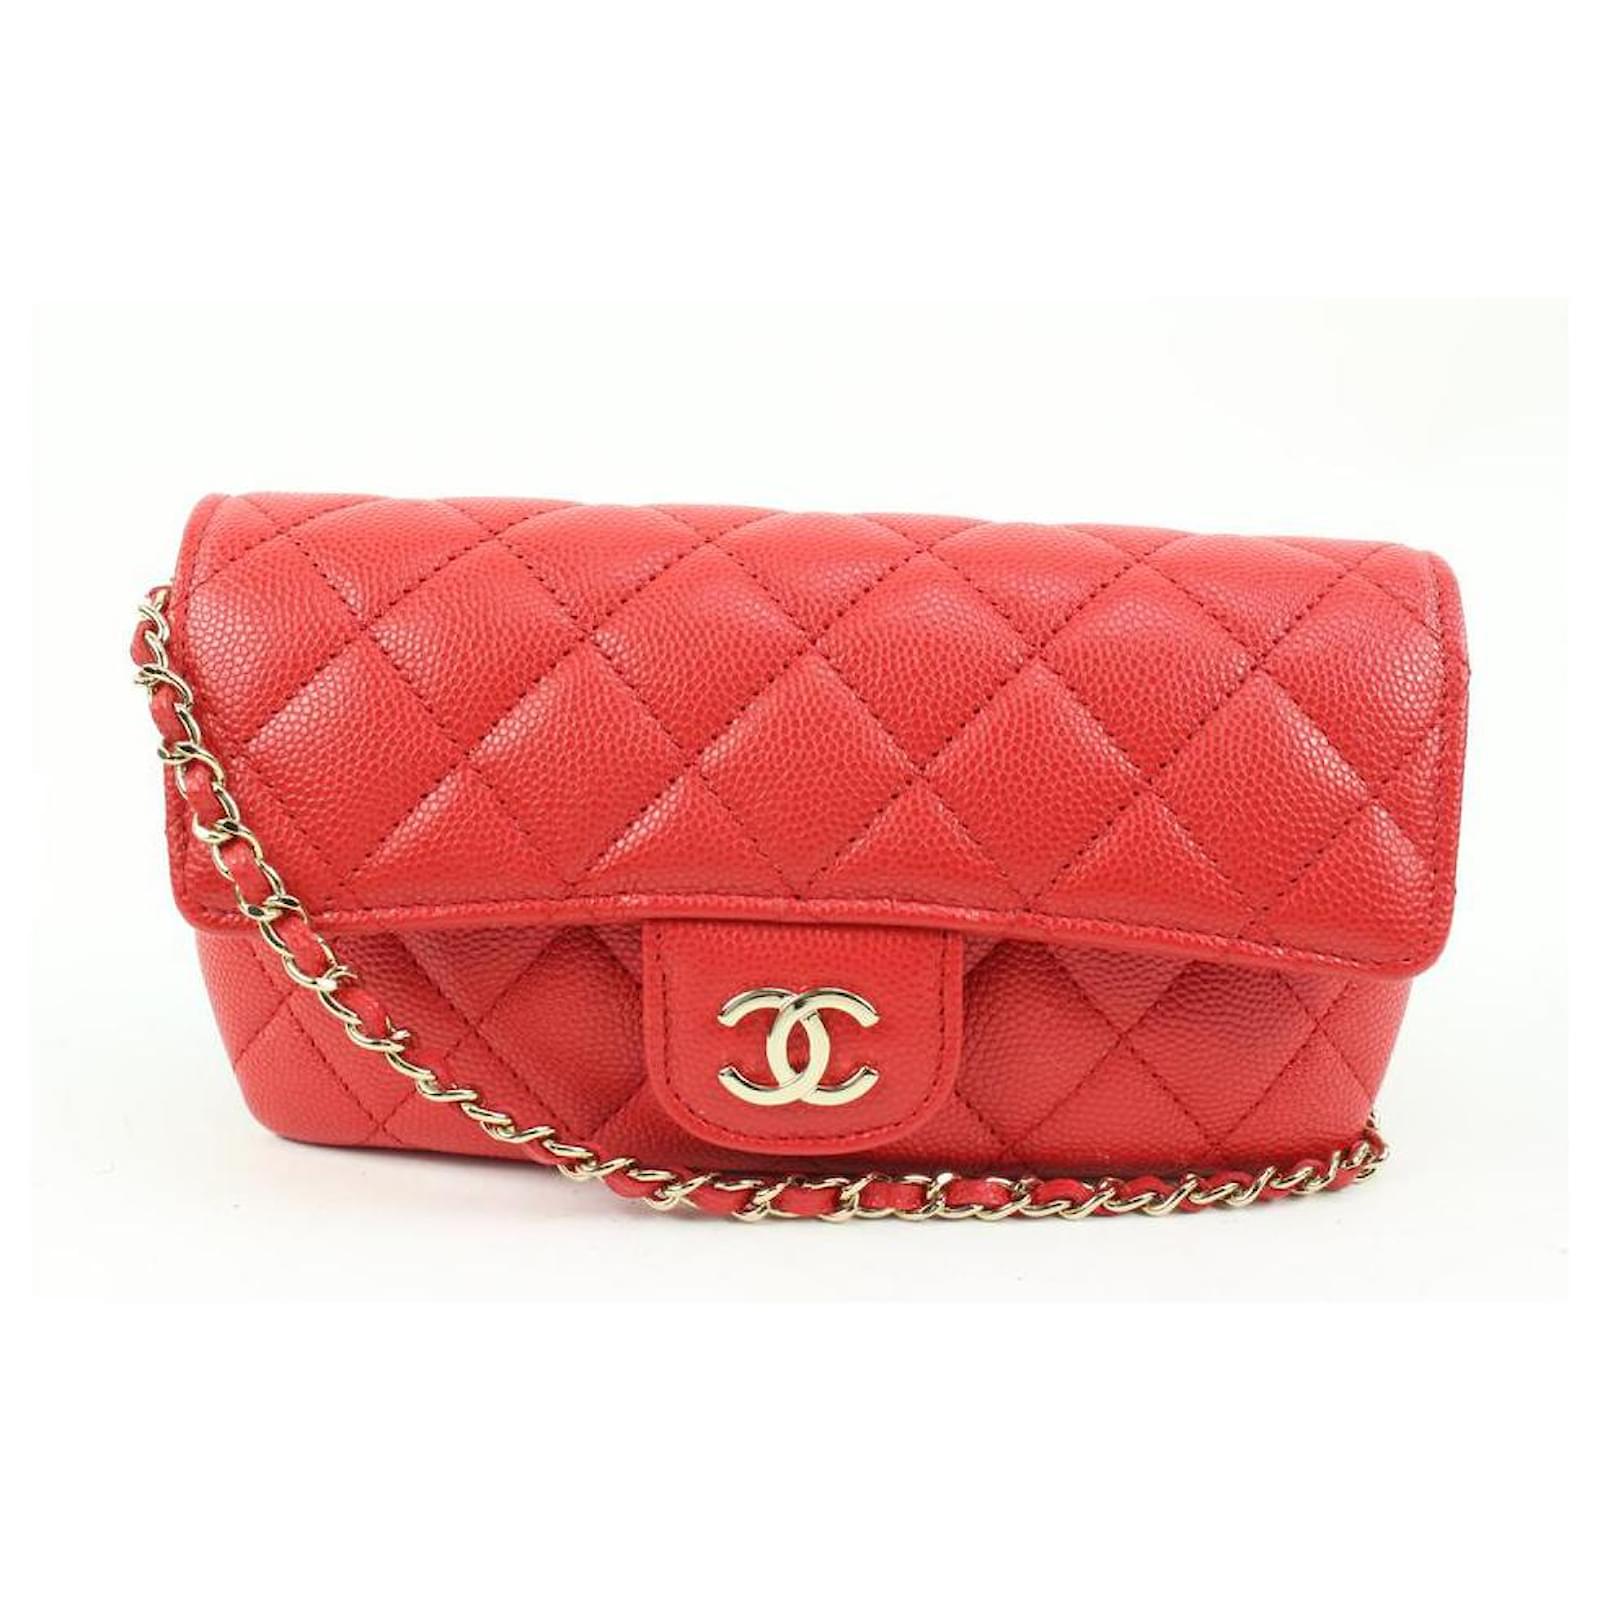 Chanel Red Chevron Quilted Patent Leather Classic Rectangular Mini Flap Bag